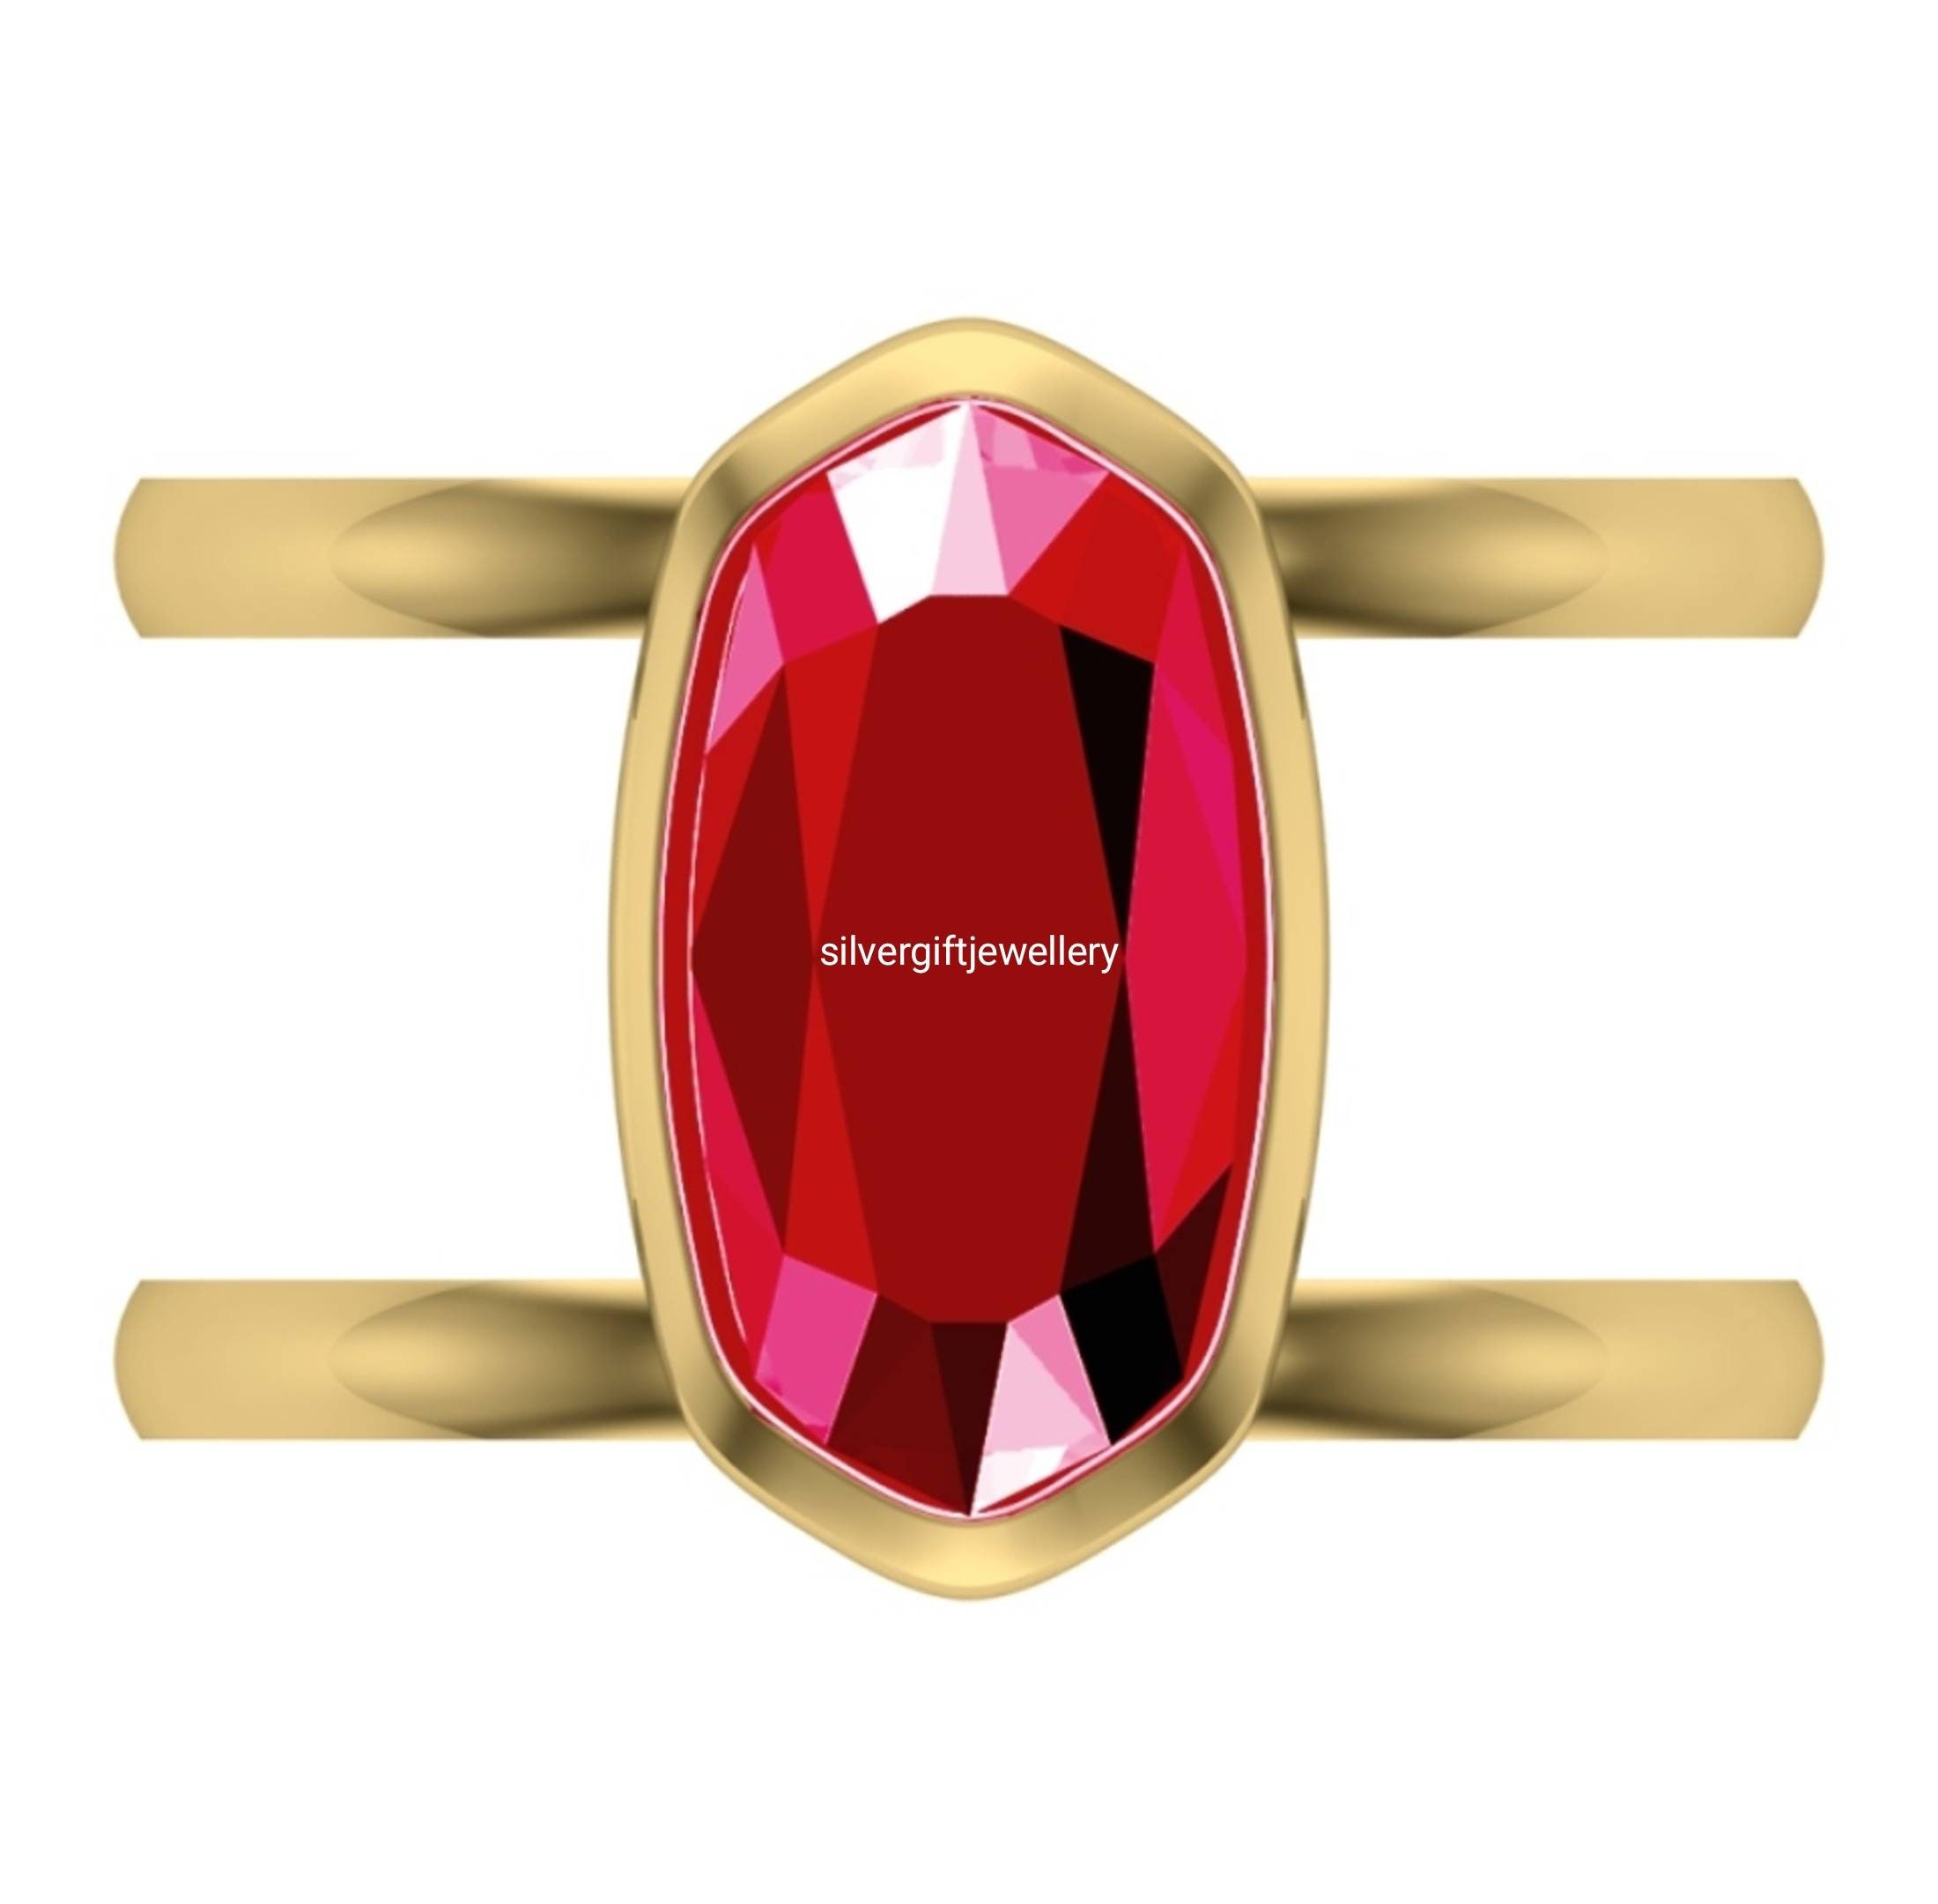 BLOOD RED STONE RING – My kind of Jewel